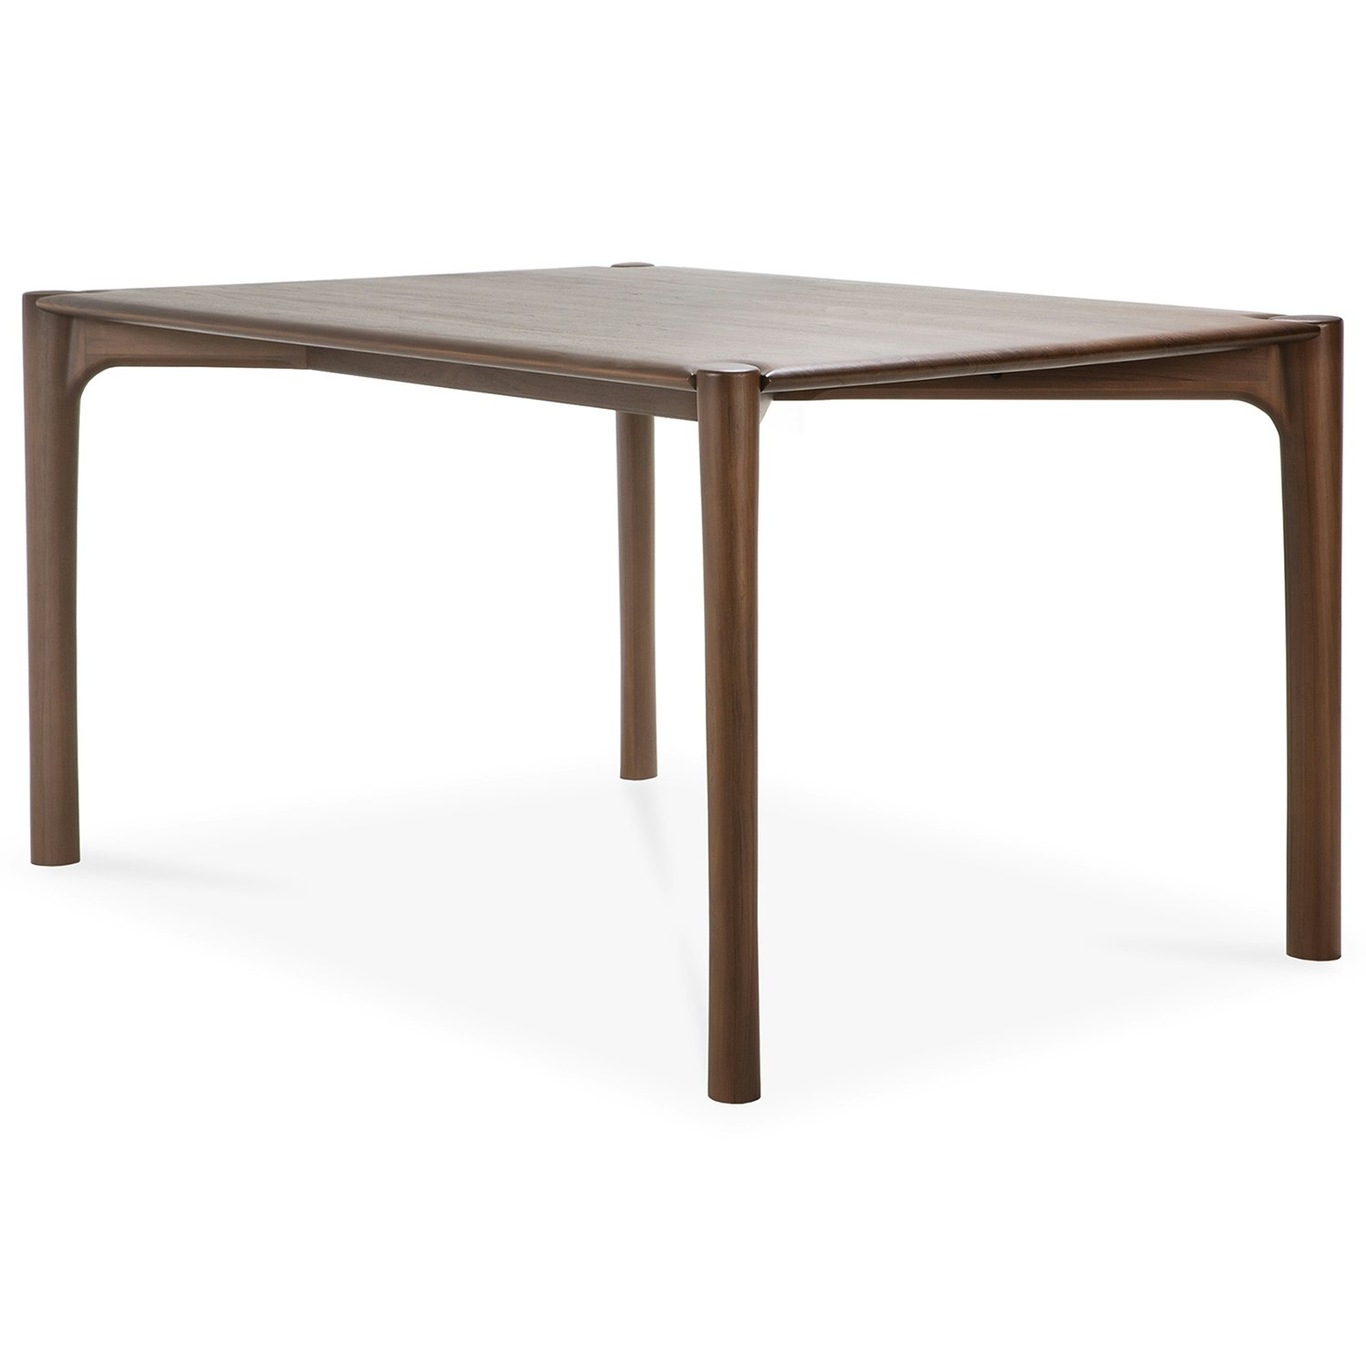 PI Dining Table Dark Stained Teak, 80x160 cm